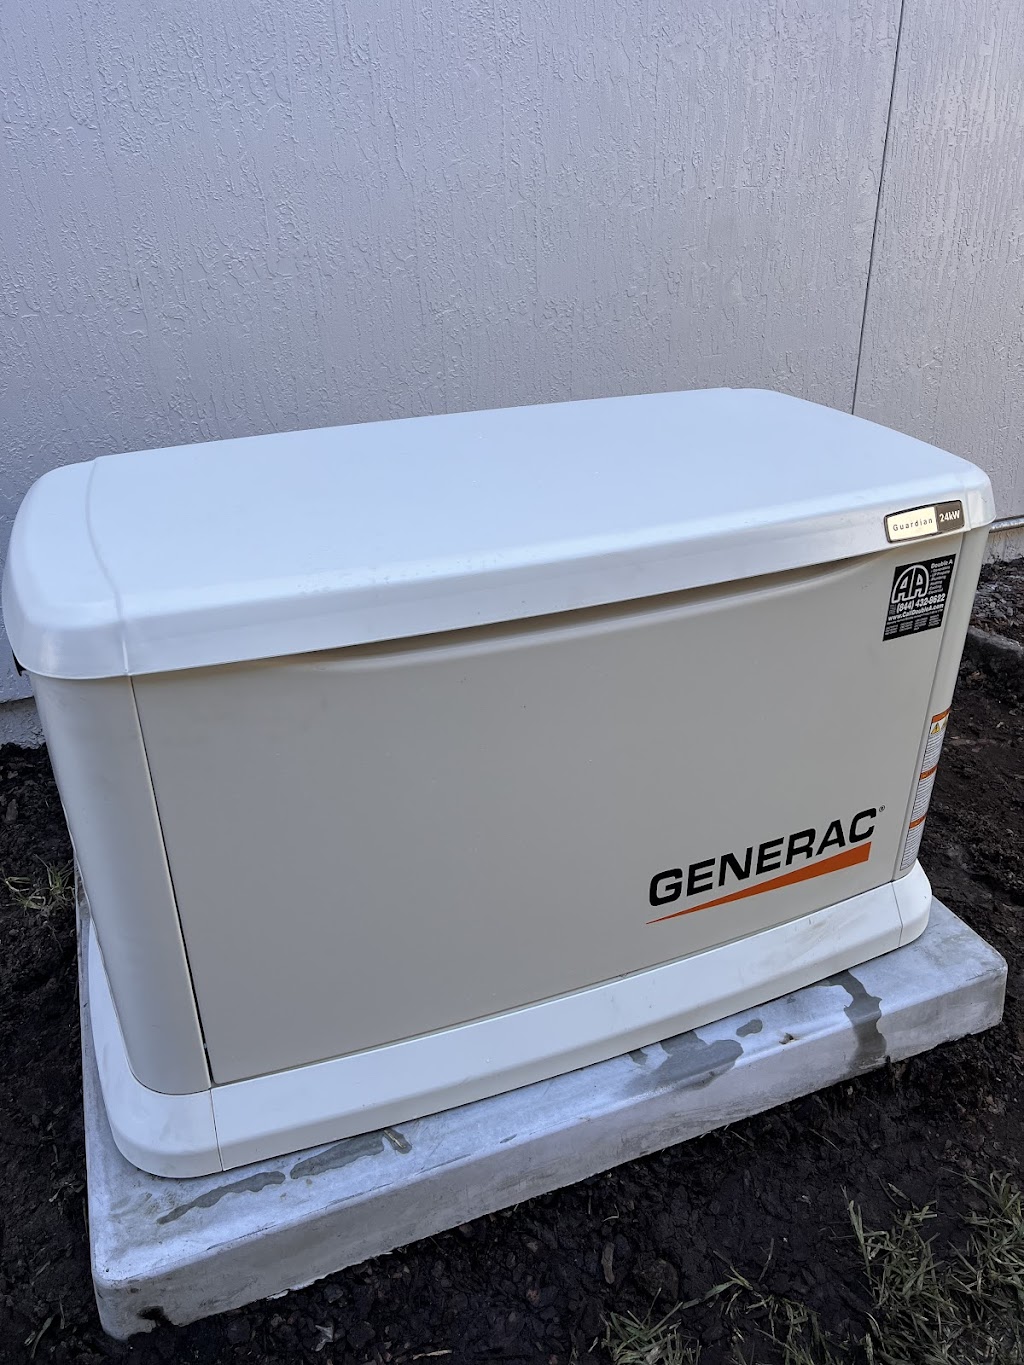 Generac Generator, Solar And Air Conditioning Dealer - Double A | 6353 Greenland Rd, Jacksonville, FL 32258 | Phone: (844) 432-8622